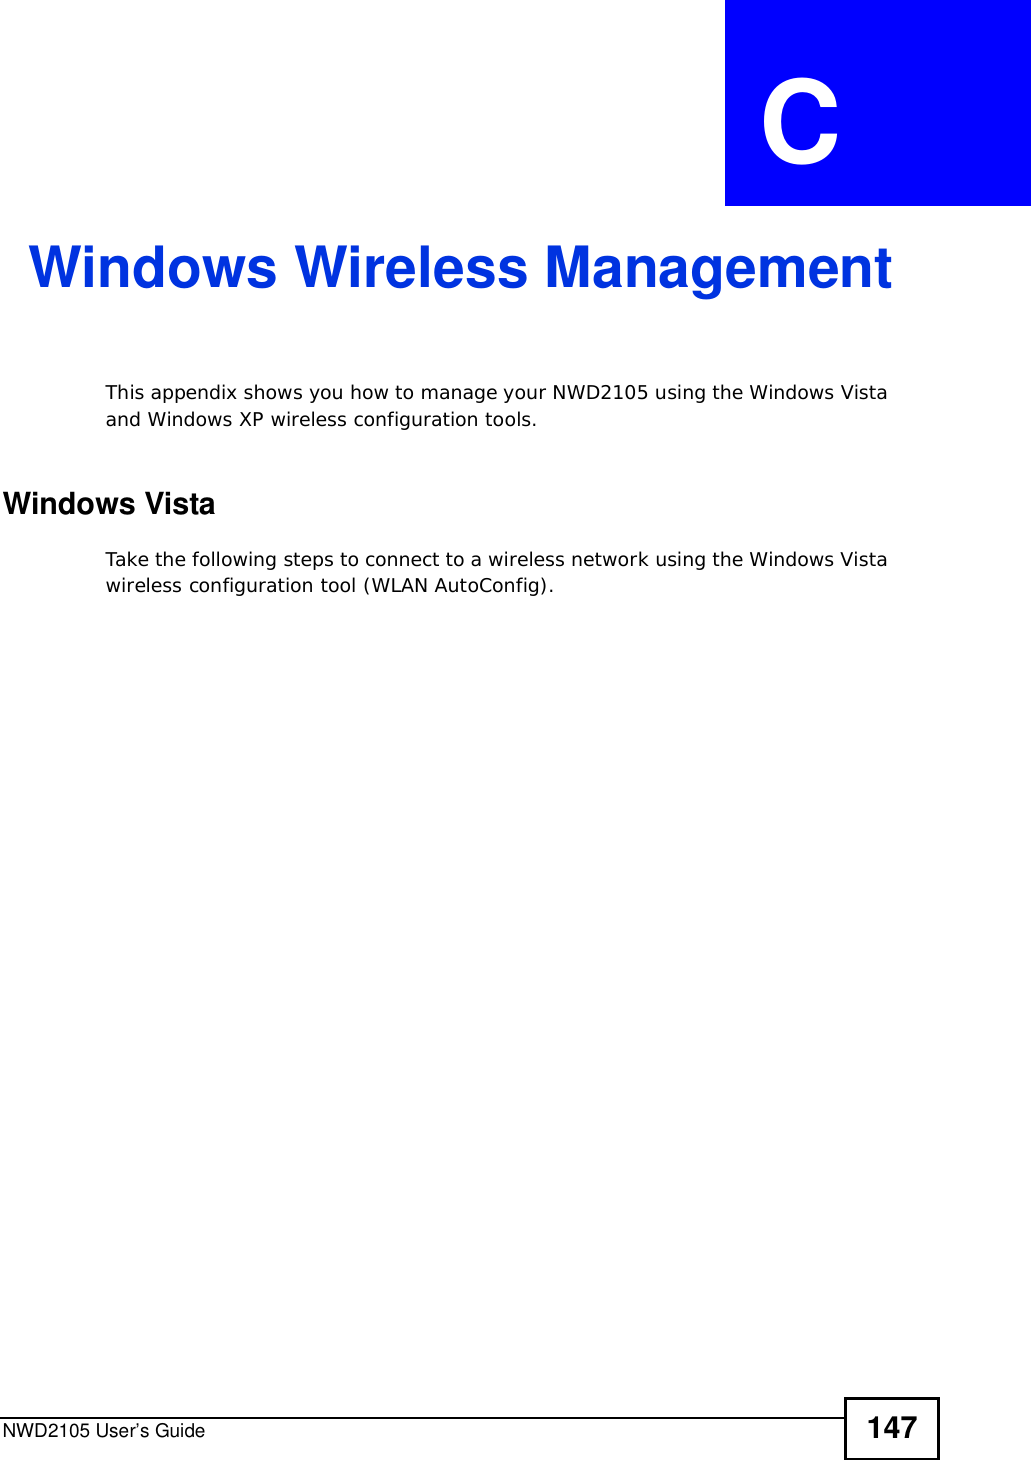 NWD2105 User’s Guide 147APPENDIX  C Windows Wireless ManagementThis appendix shows you how to manage your NWD2105 using the Windows Vista and Windows XP wireless configuration tools.Windows VistaTake the following steps to connect to a wireless network using the Windows Vista wireless configuration tool (WLAN AutoConfig).